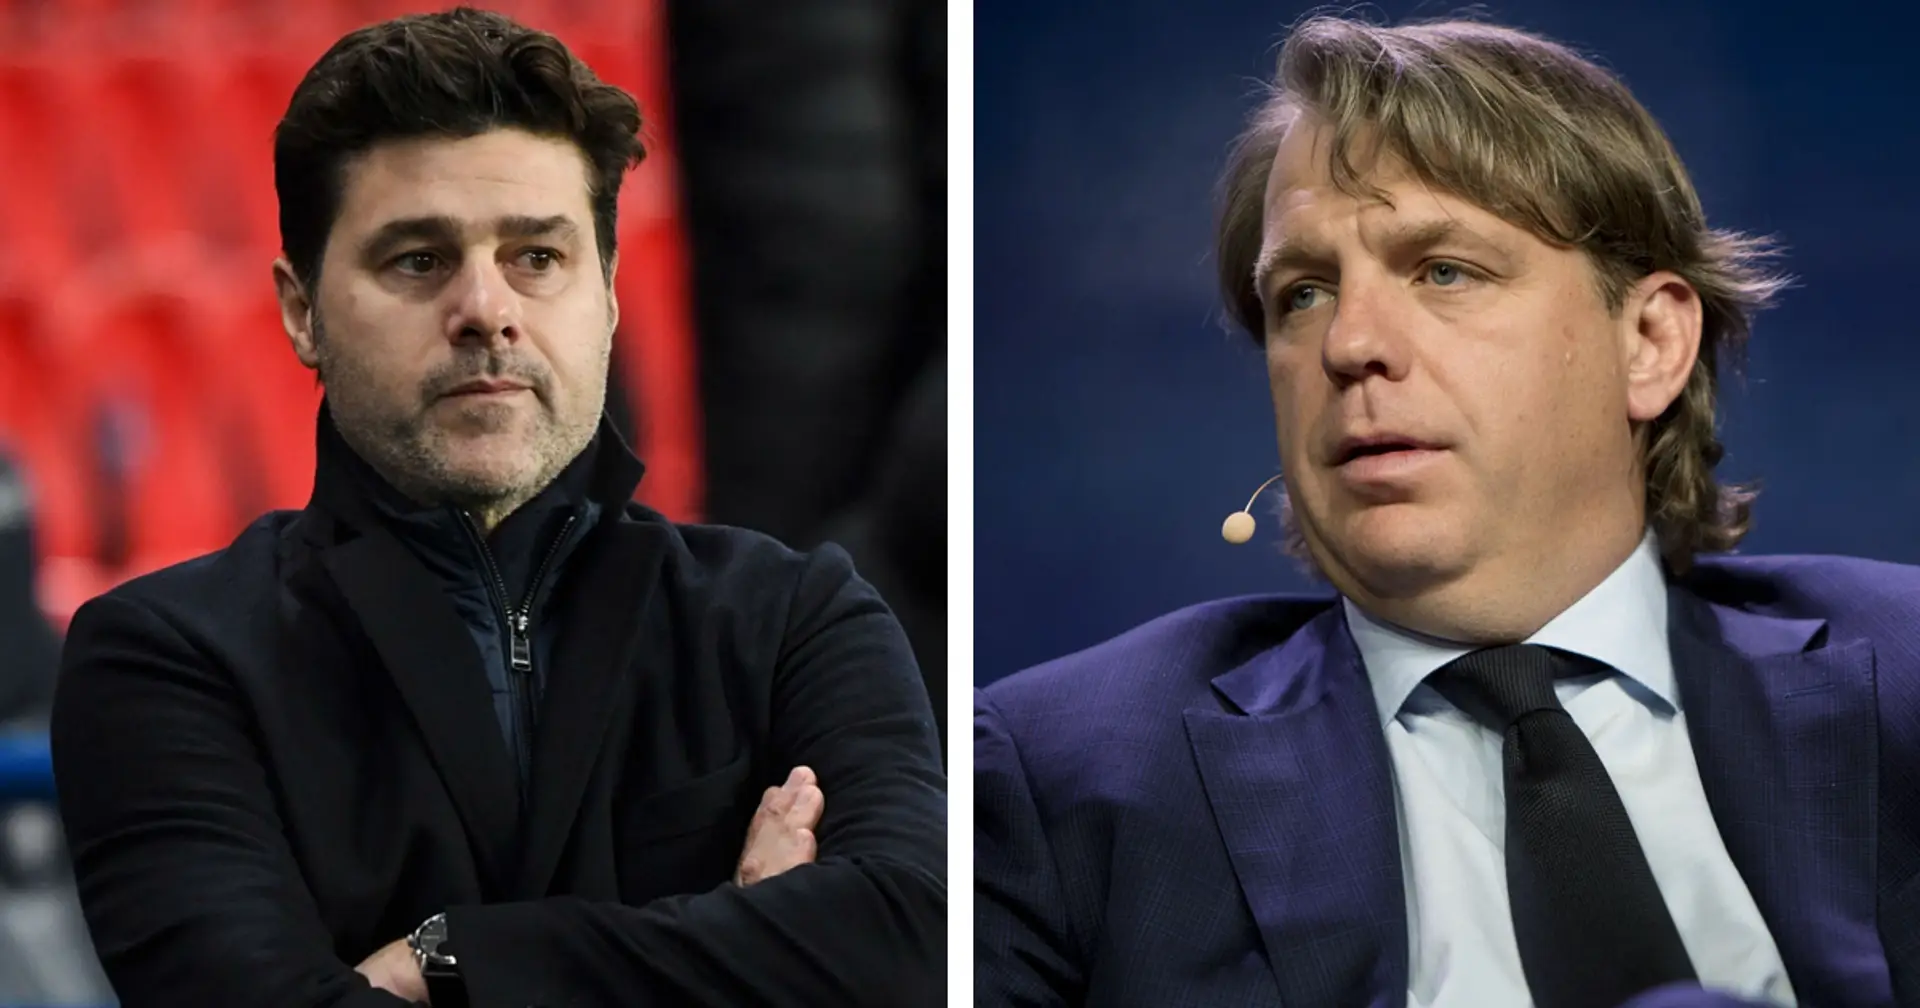 'A world-class coach with an outstanding track record': Boehly on appointing Pochettino as Chelsea manager